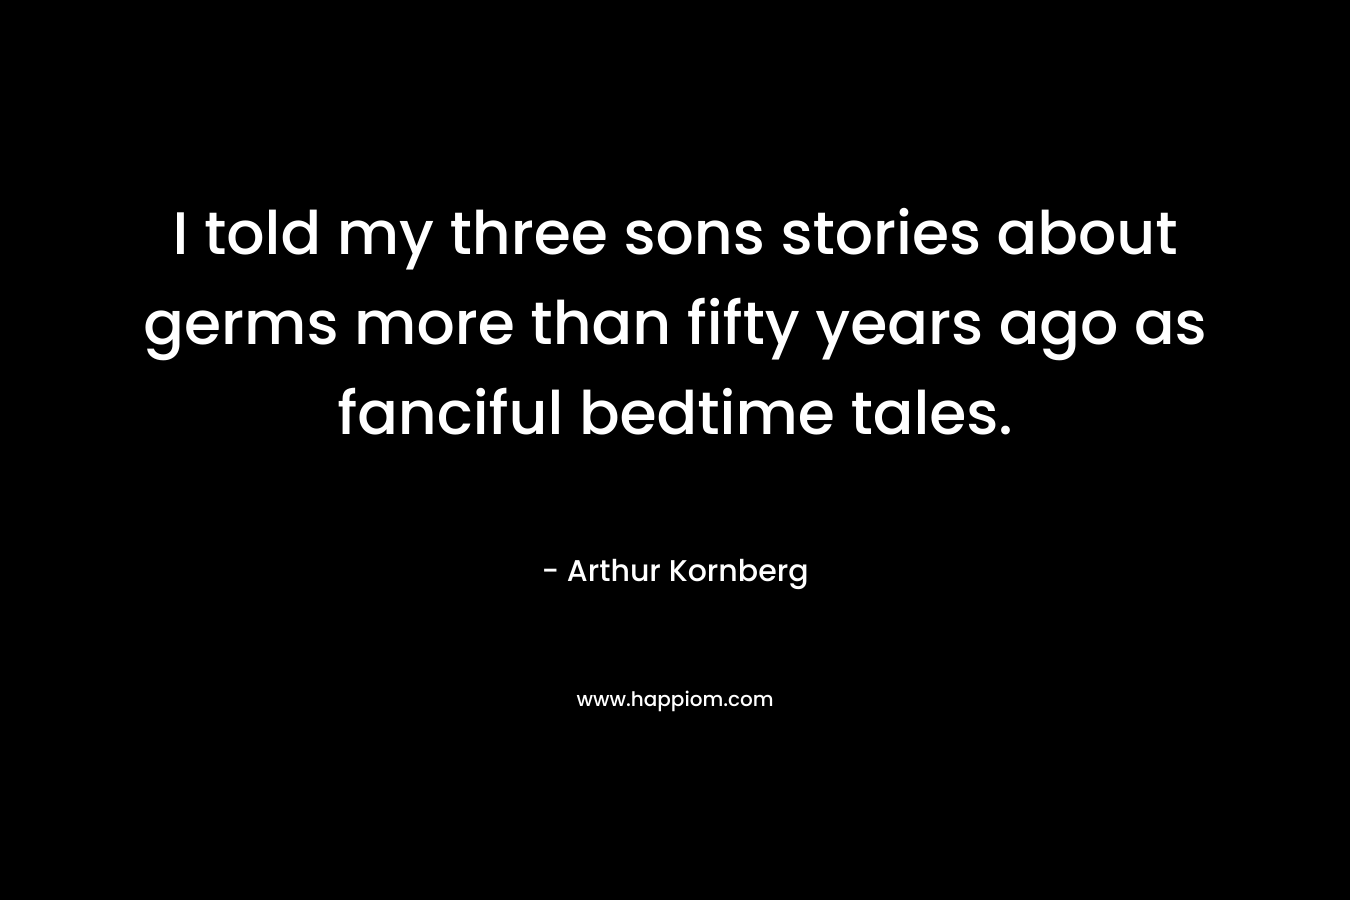 I told my three sons stories about germs more than fifty years ago as fanciful bedtime tales. – Arthur Kornberg